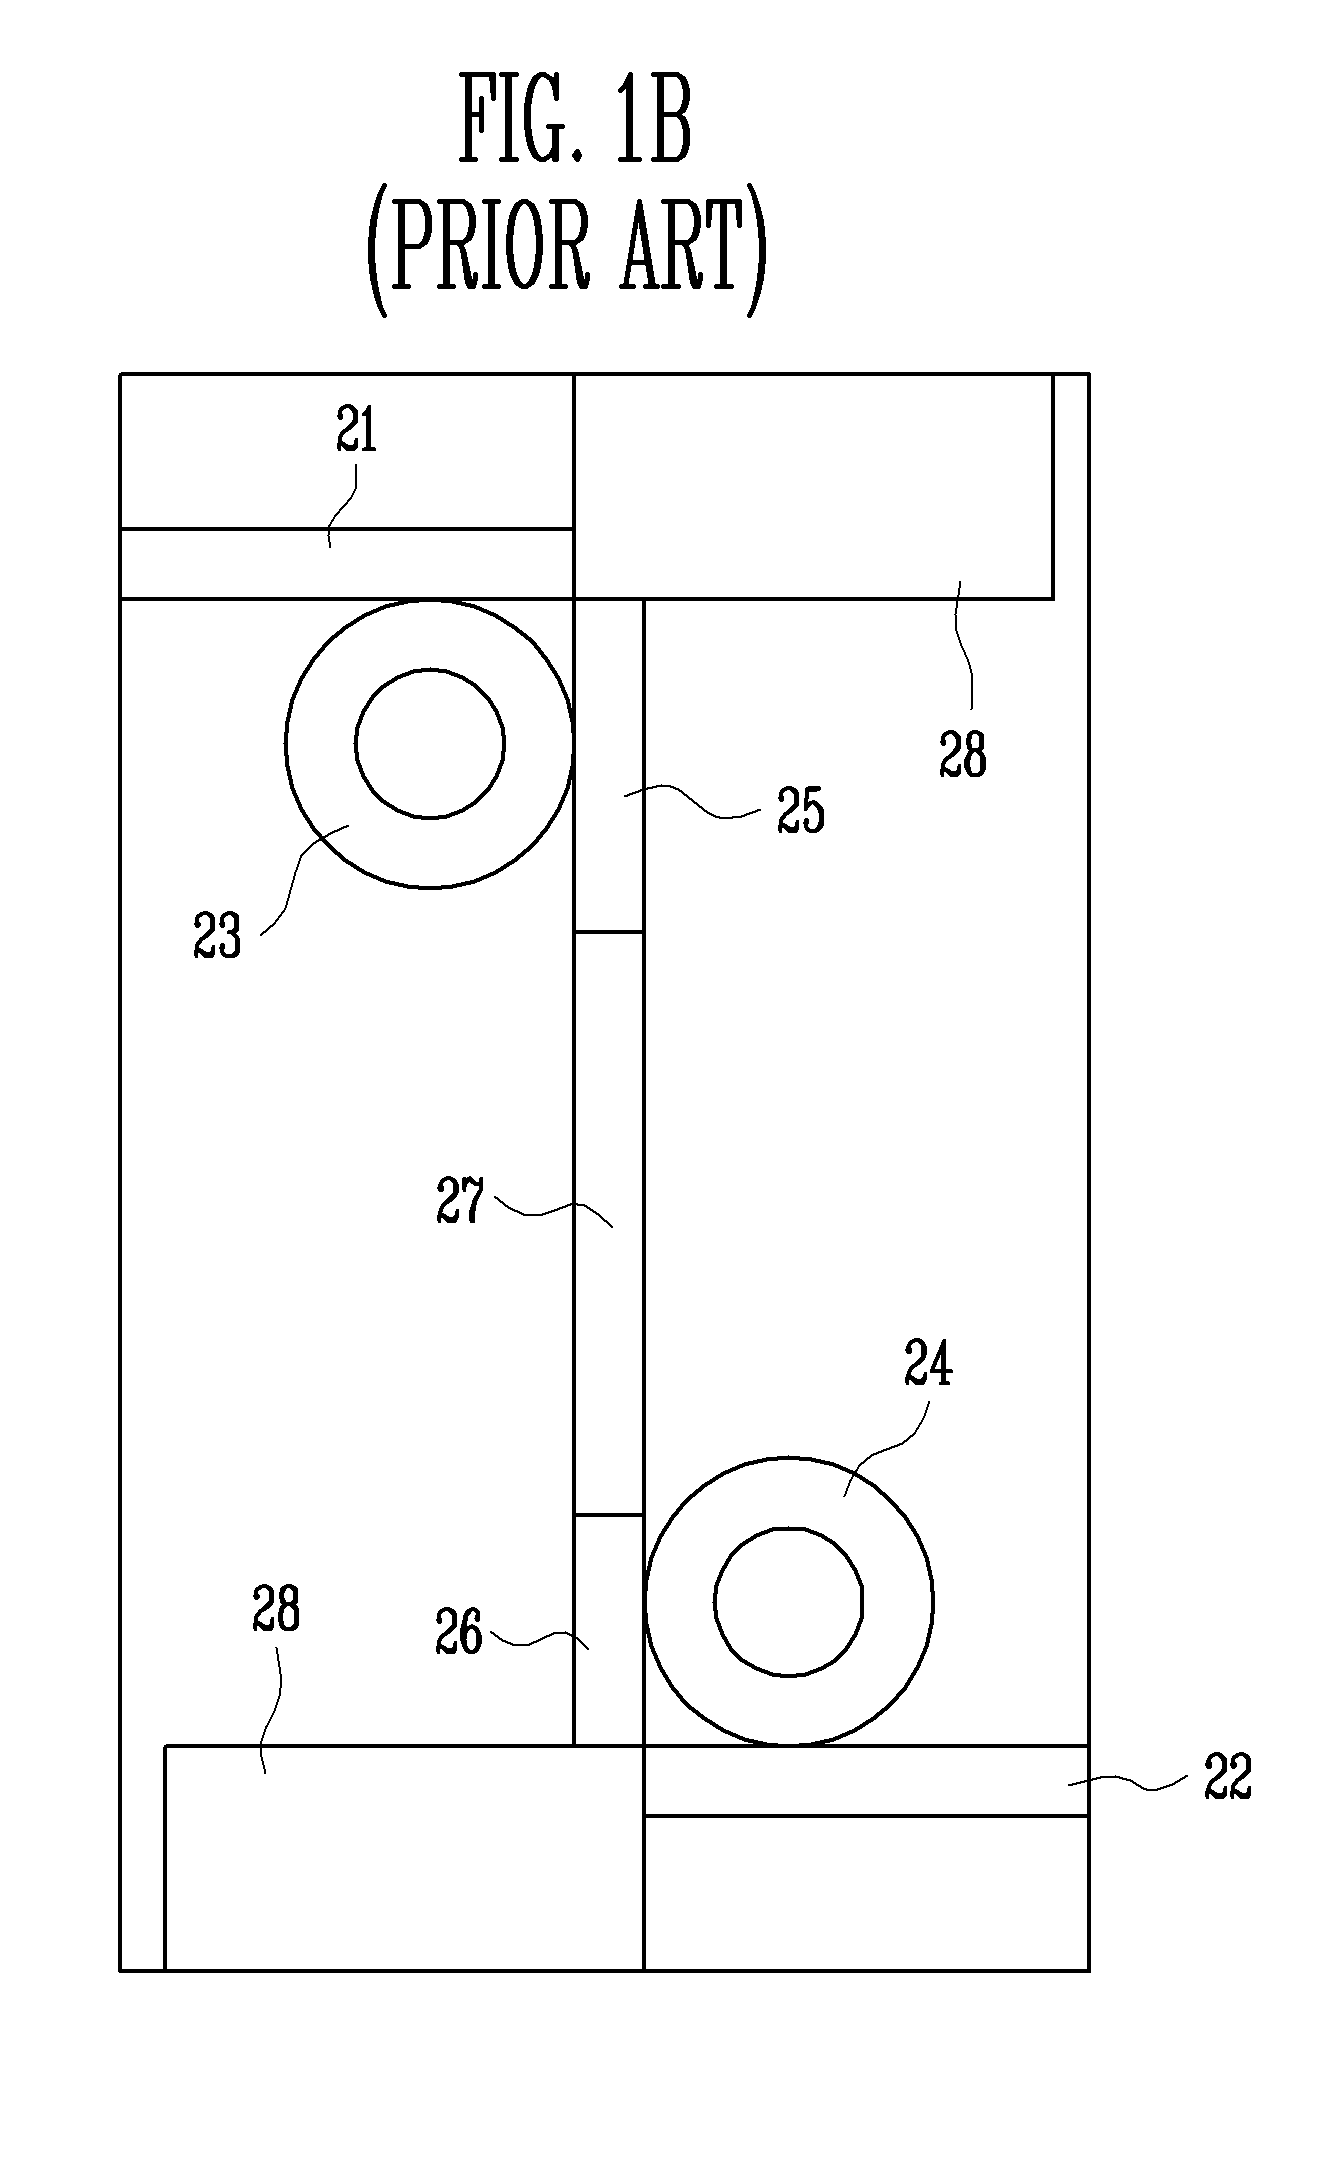 Wavelength tunable laser diode using double coupled ring resonator